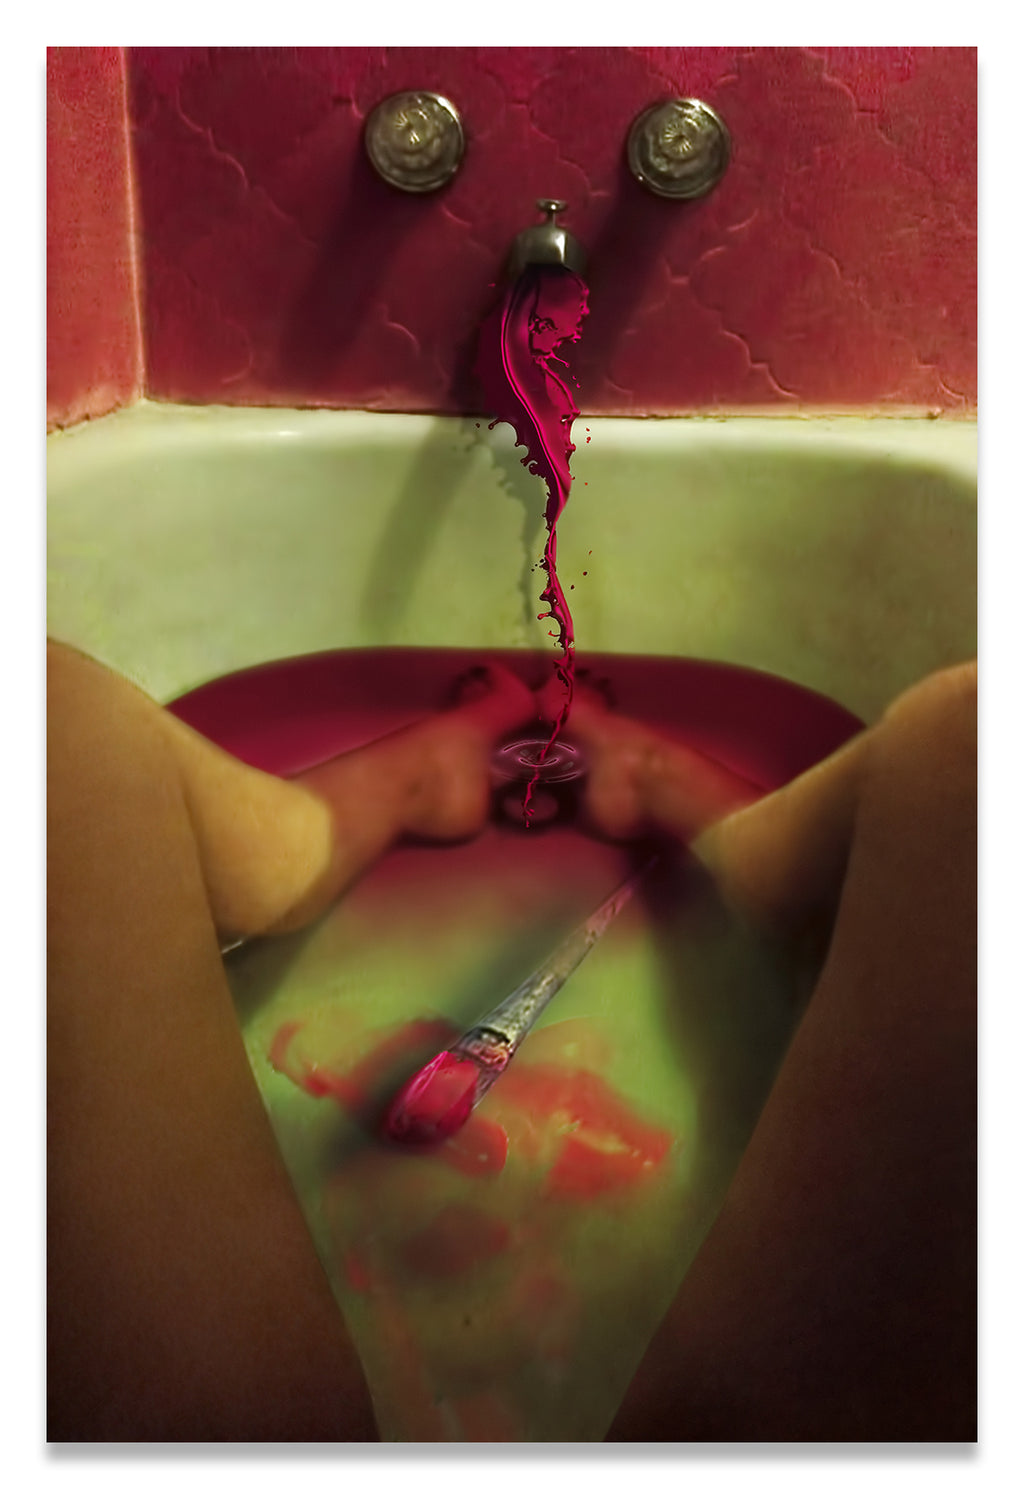 Woman sitting in bathtub birthing a paintbrush with crimson colored paint.